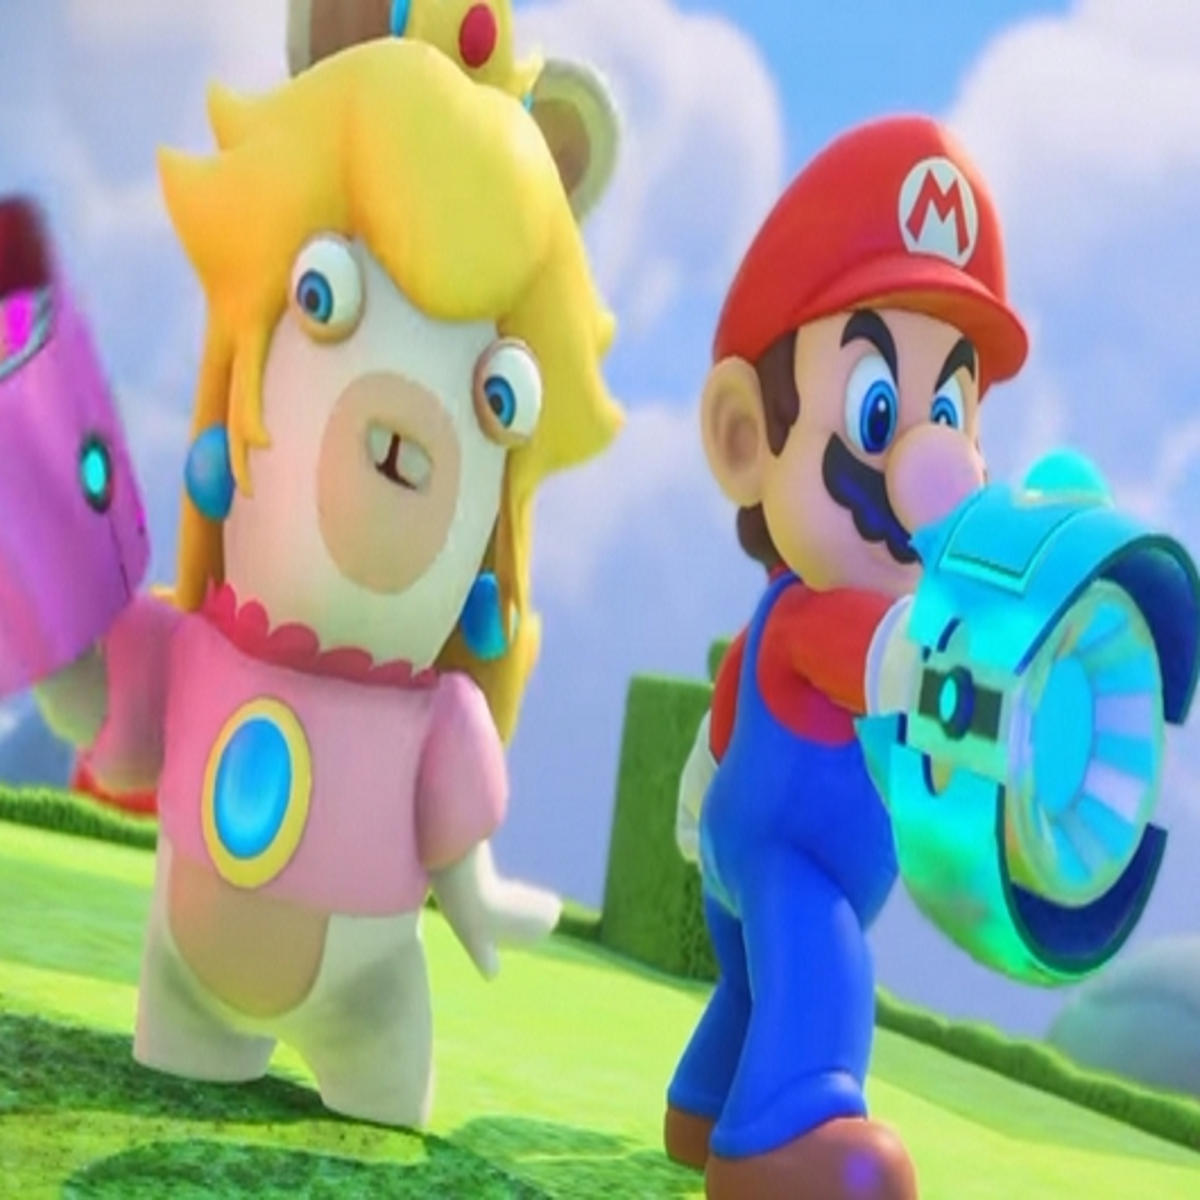 Mario + Rabbids: Kingdom Battle Review: This Combo Was The Right Strategy